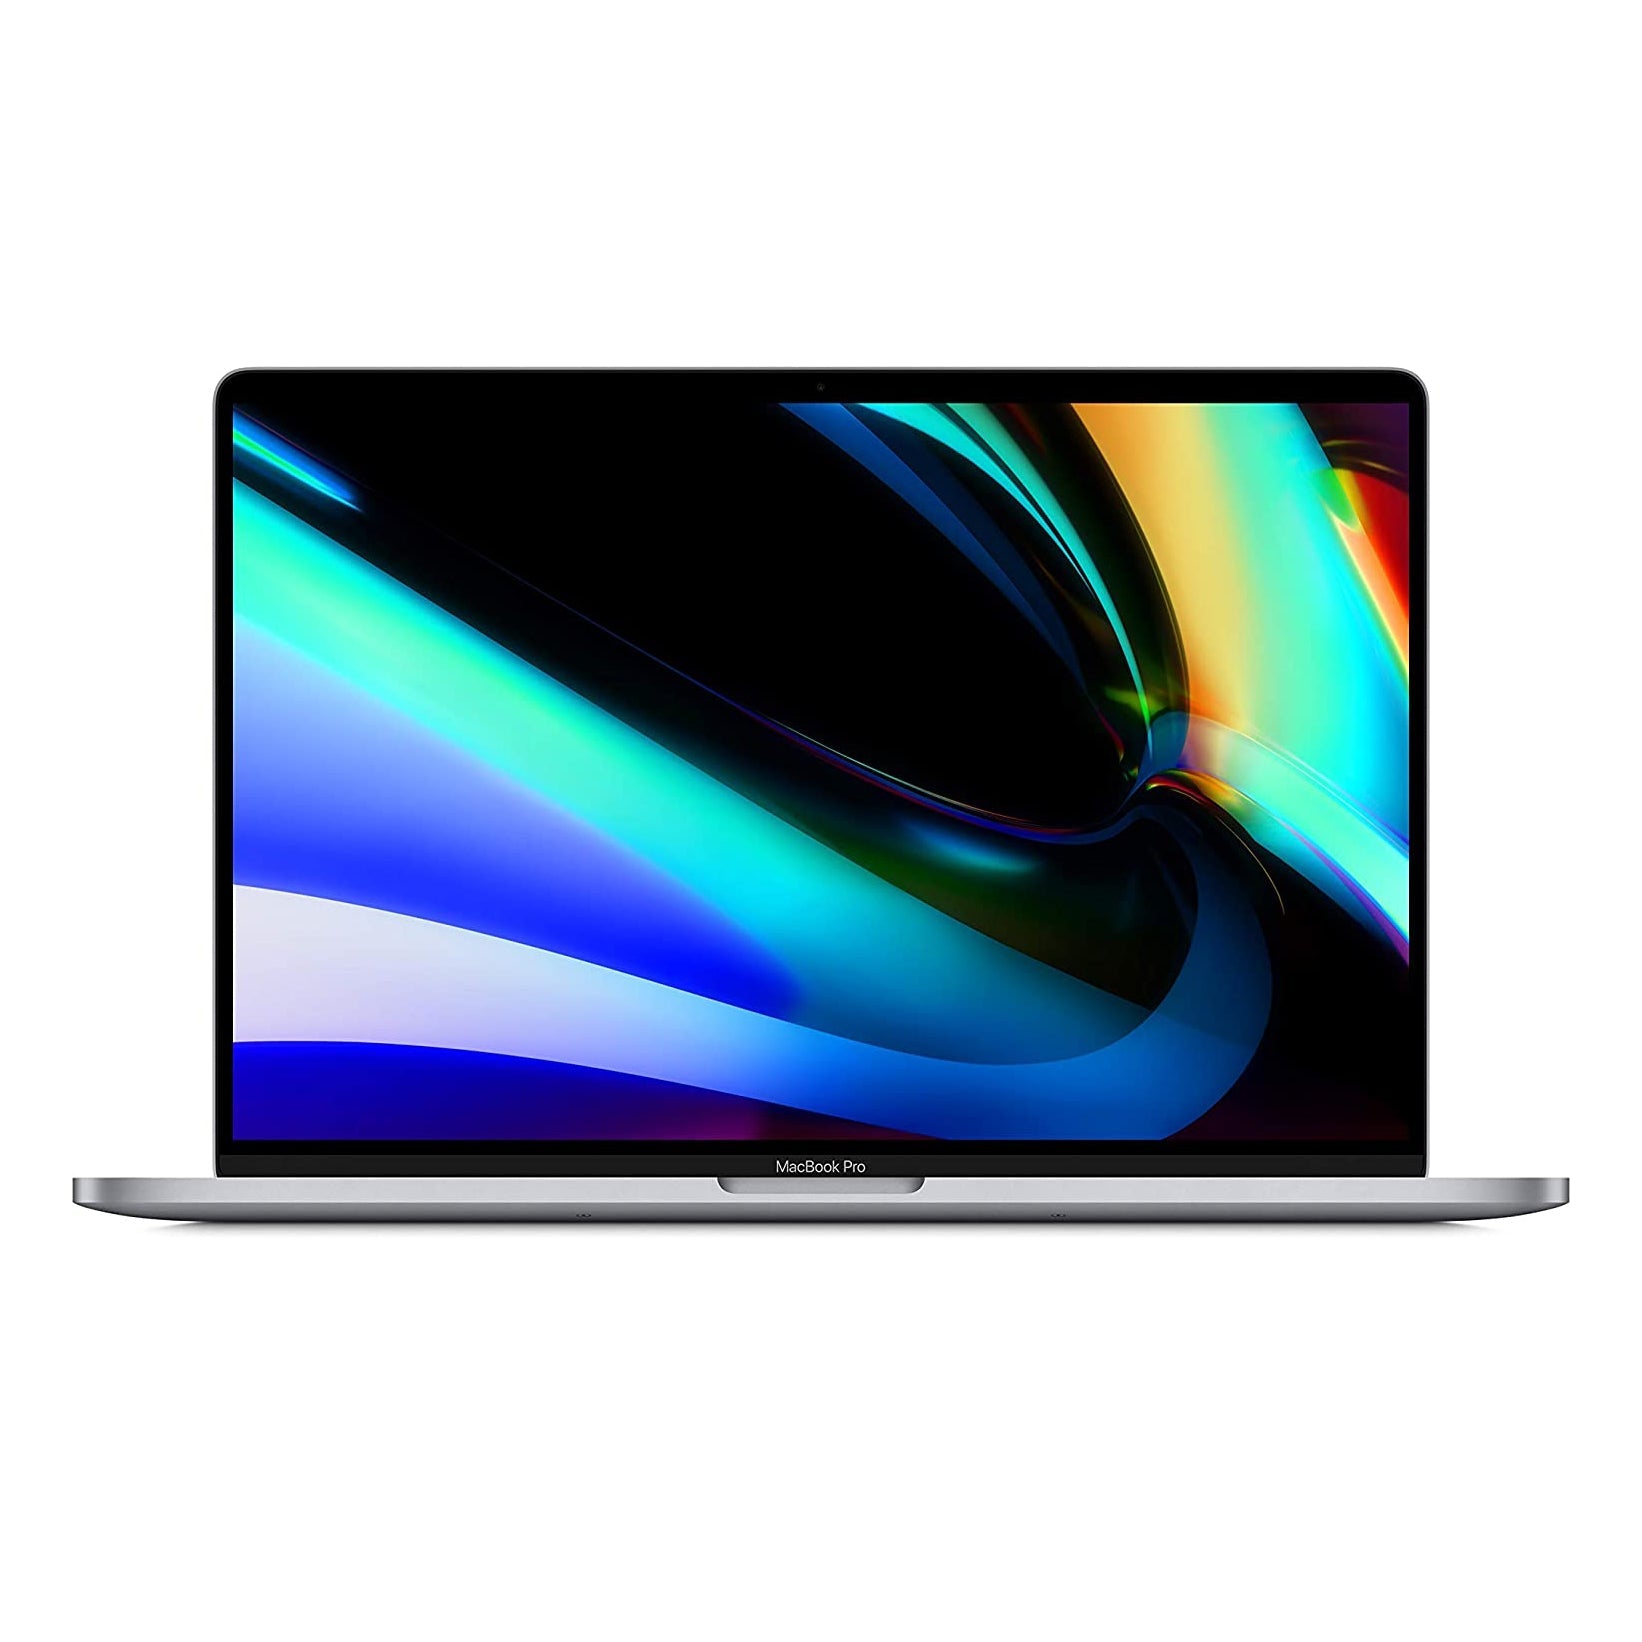 Apple MacBook Pro 16" with Touch Bar (2.30 Ghz 8 Core i9 / 16GB / 1TB) - 2019, Space Gray - Nyson Retail